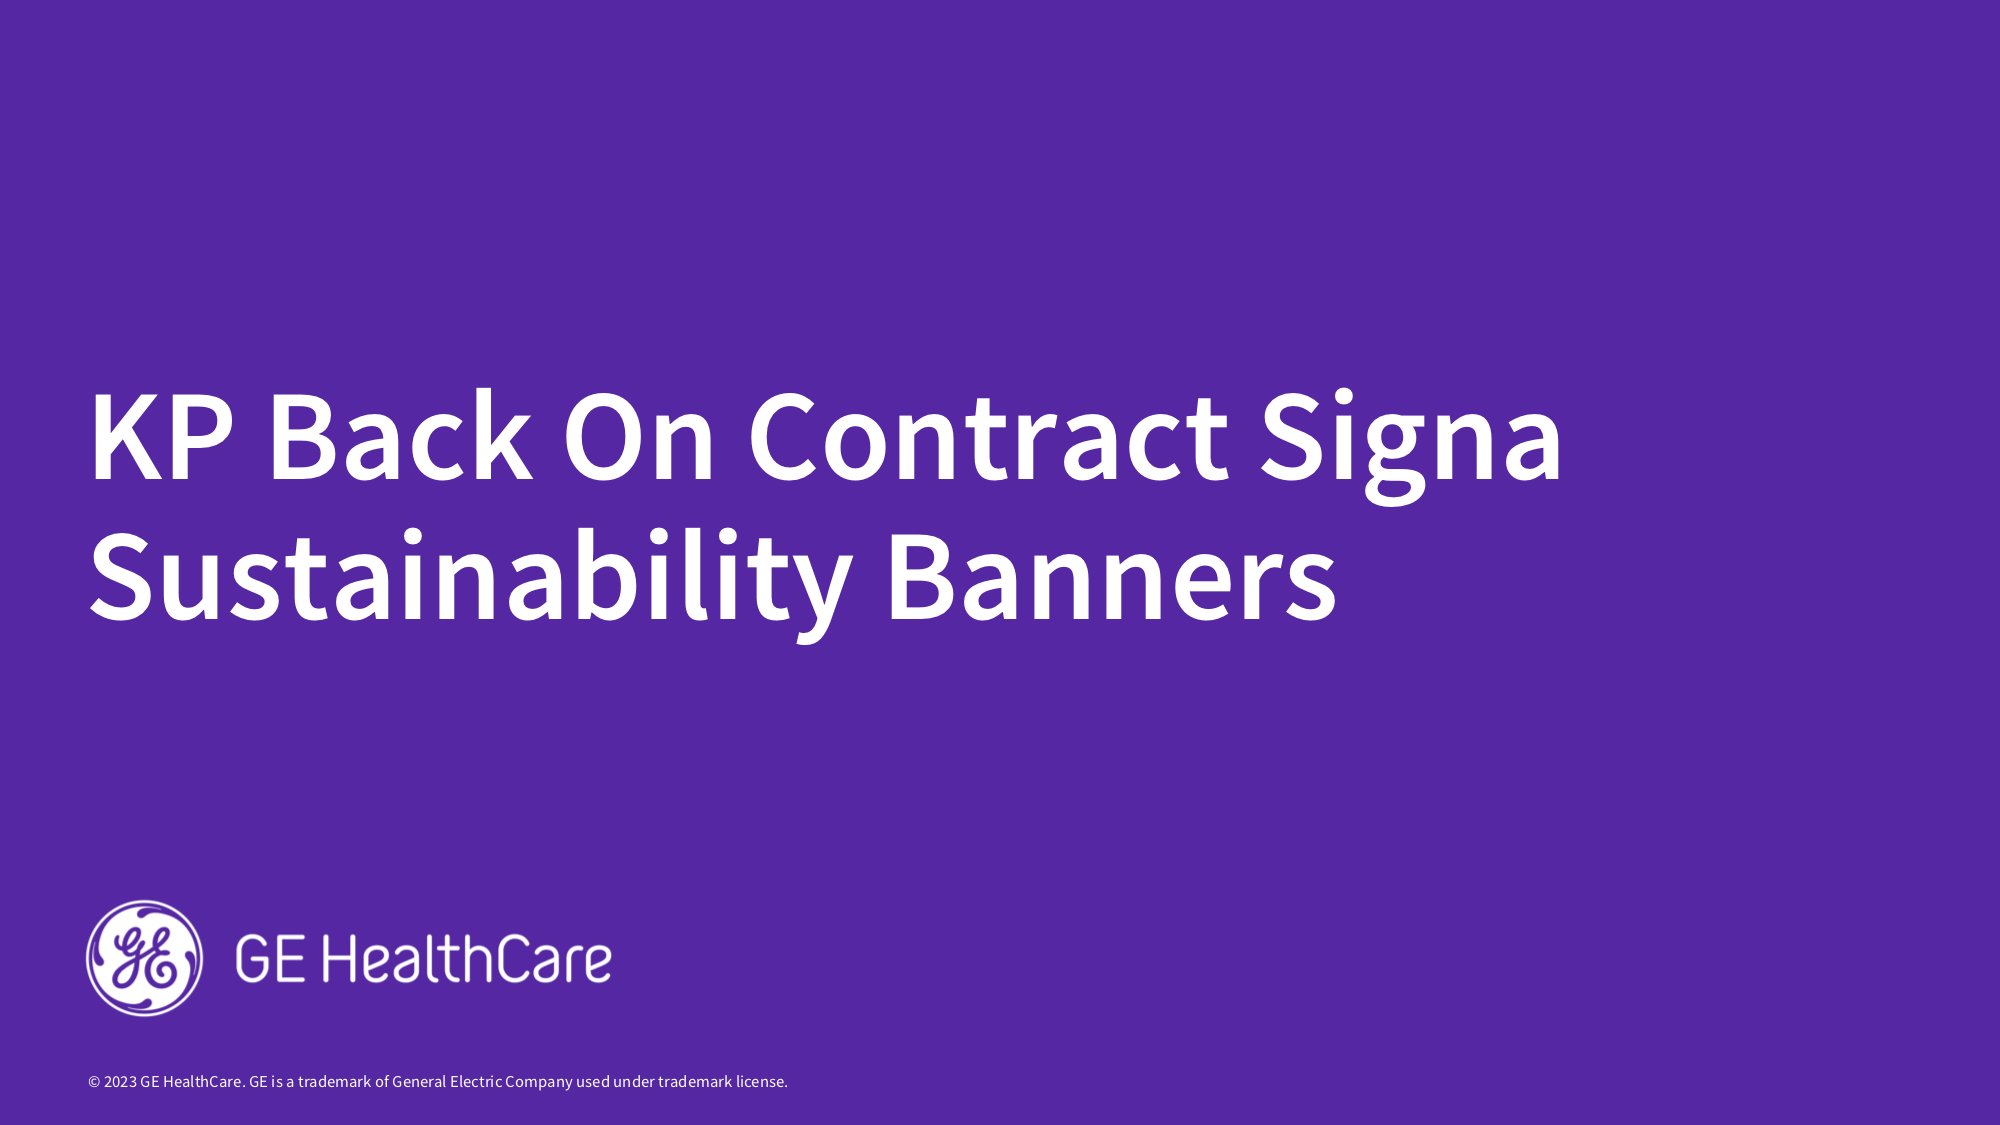 KP Signa Back On Contract Sustainabilities Banner_final.jpg